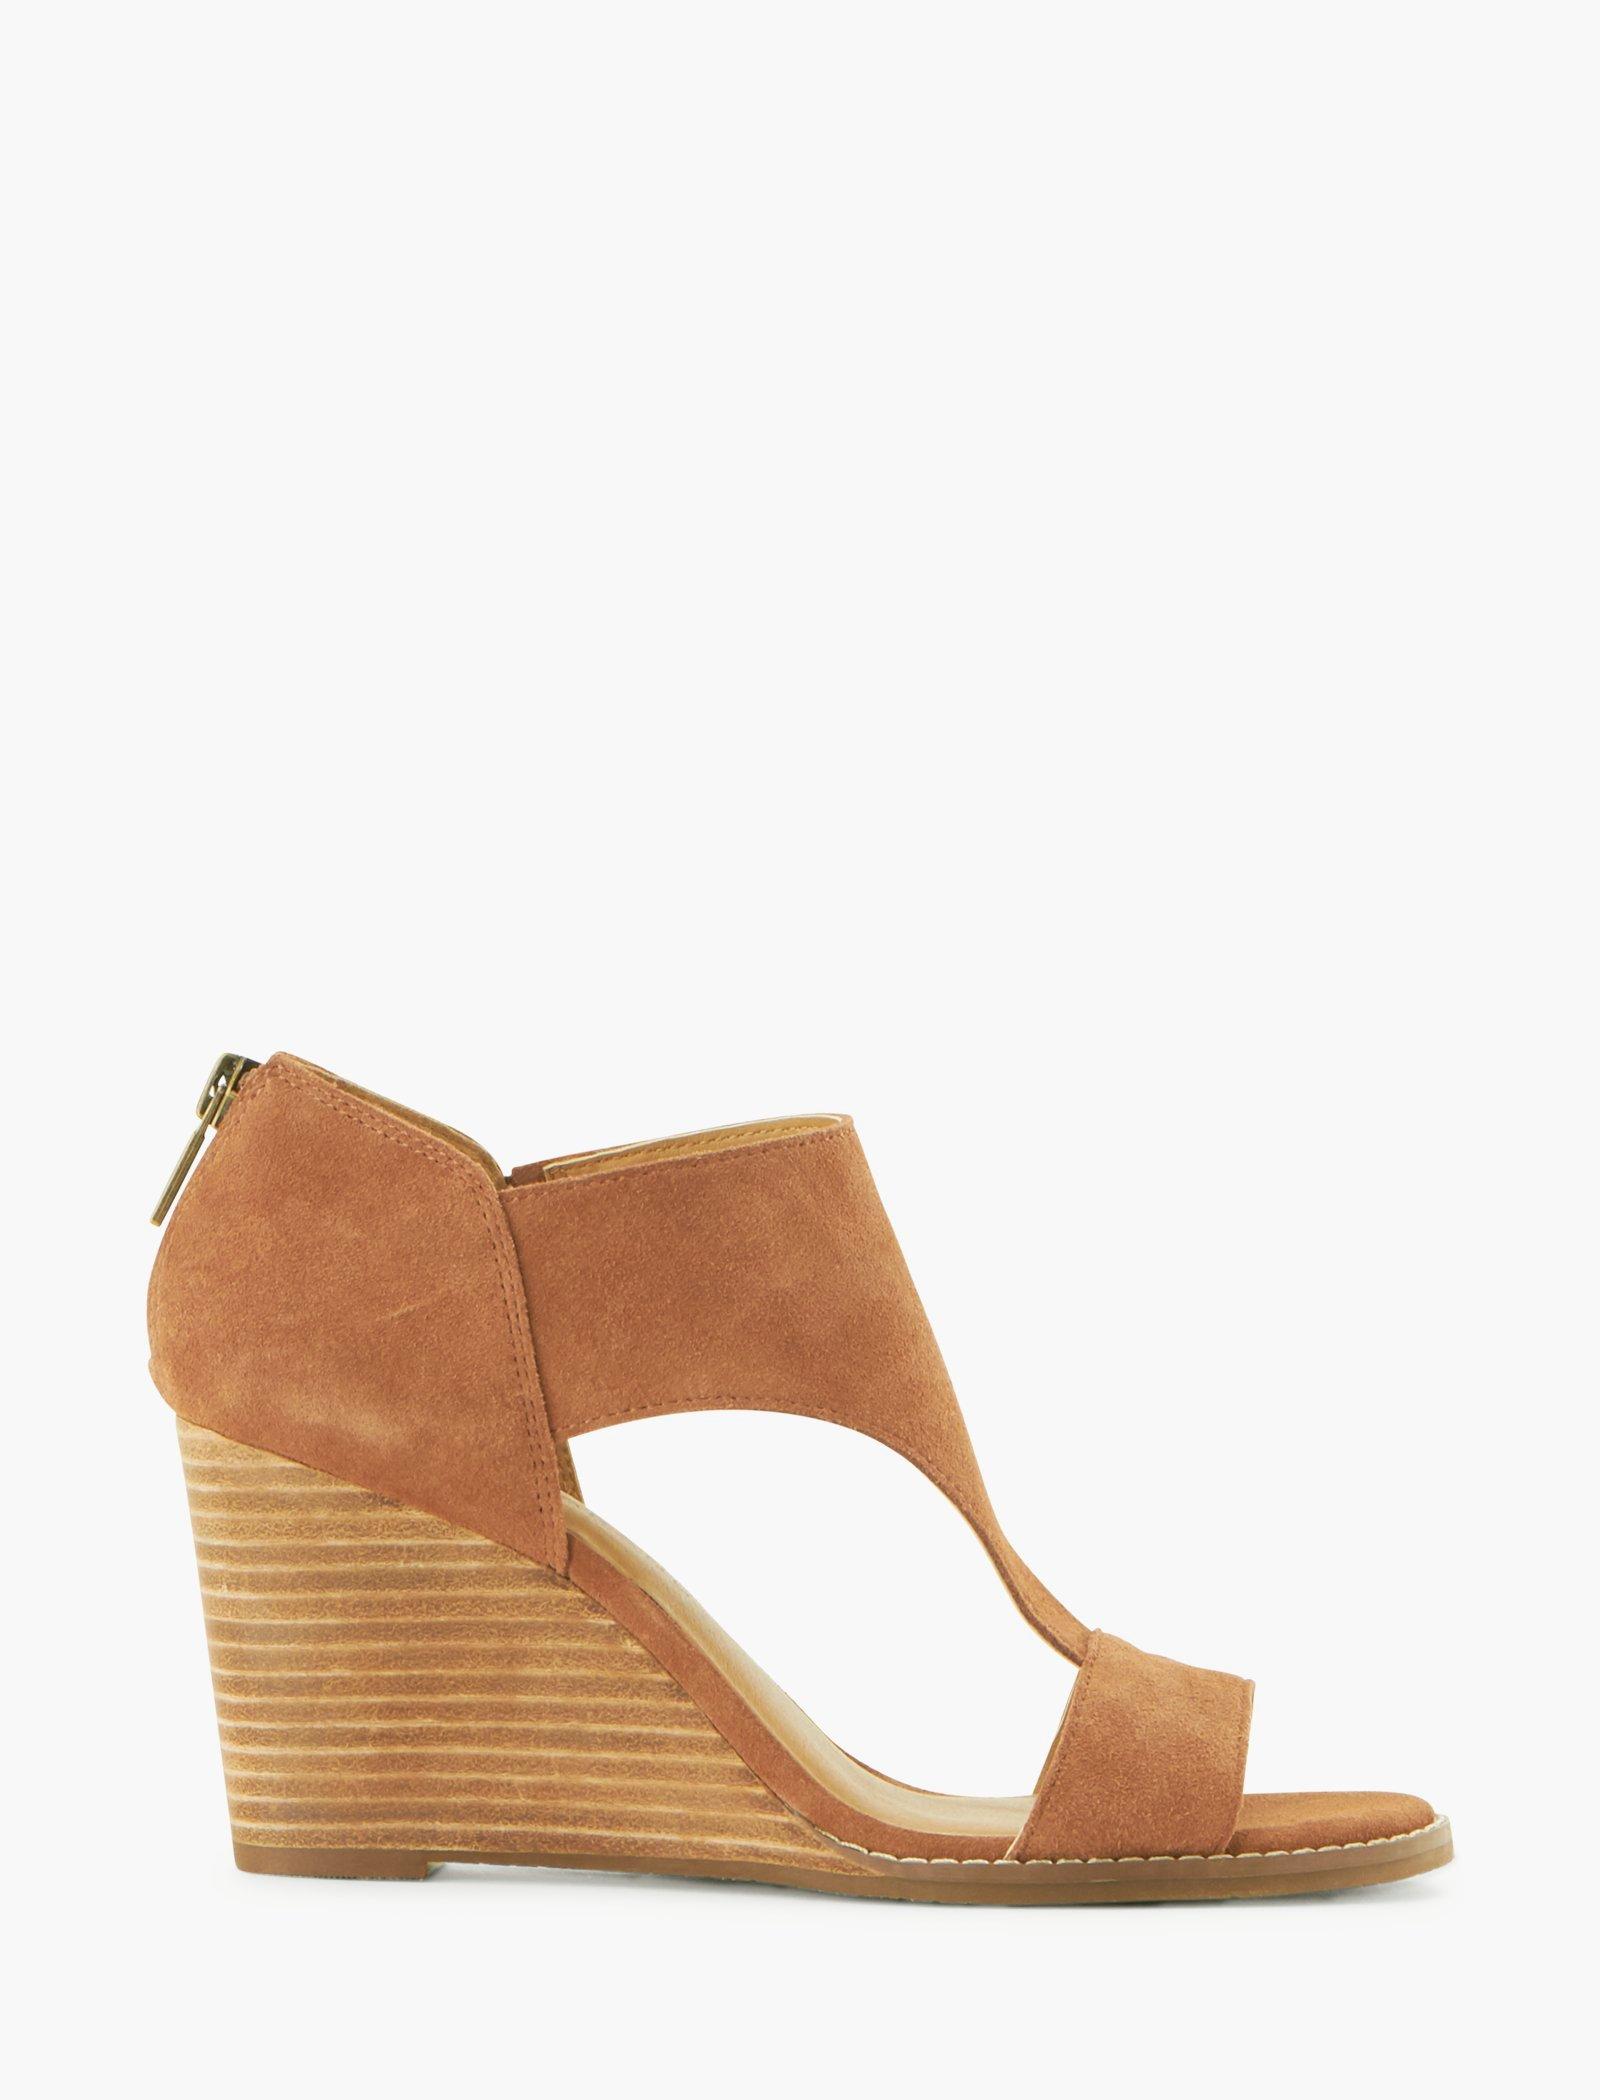 lucky brand wedge shoes